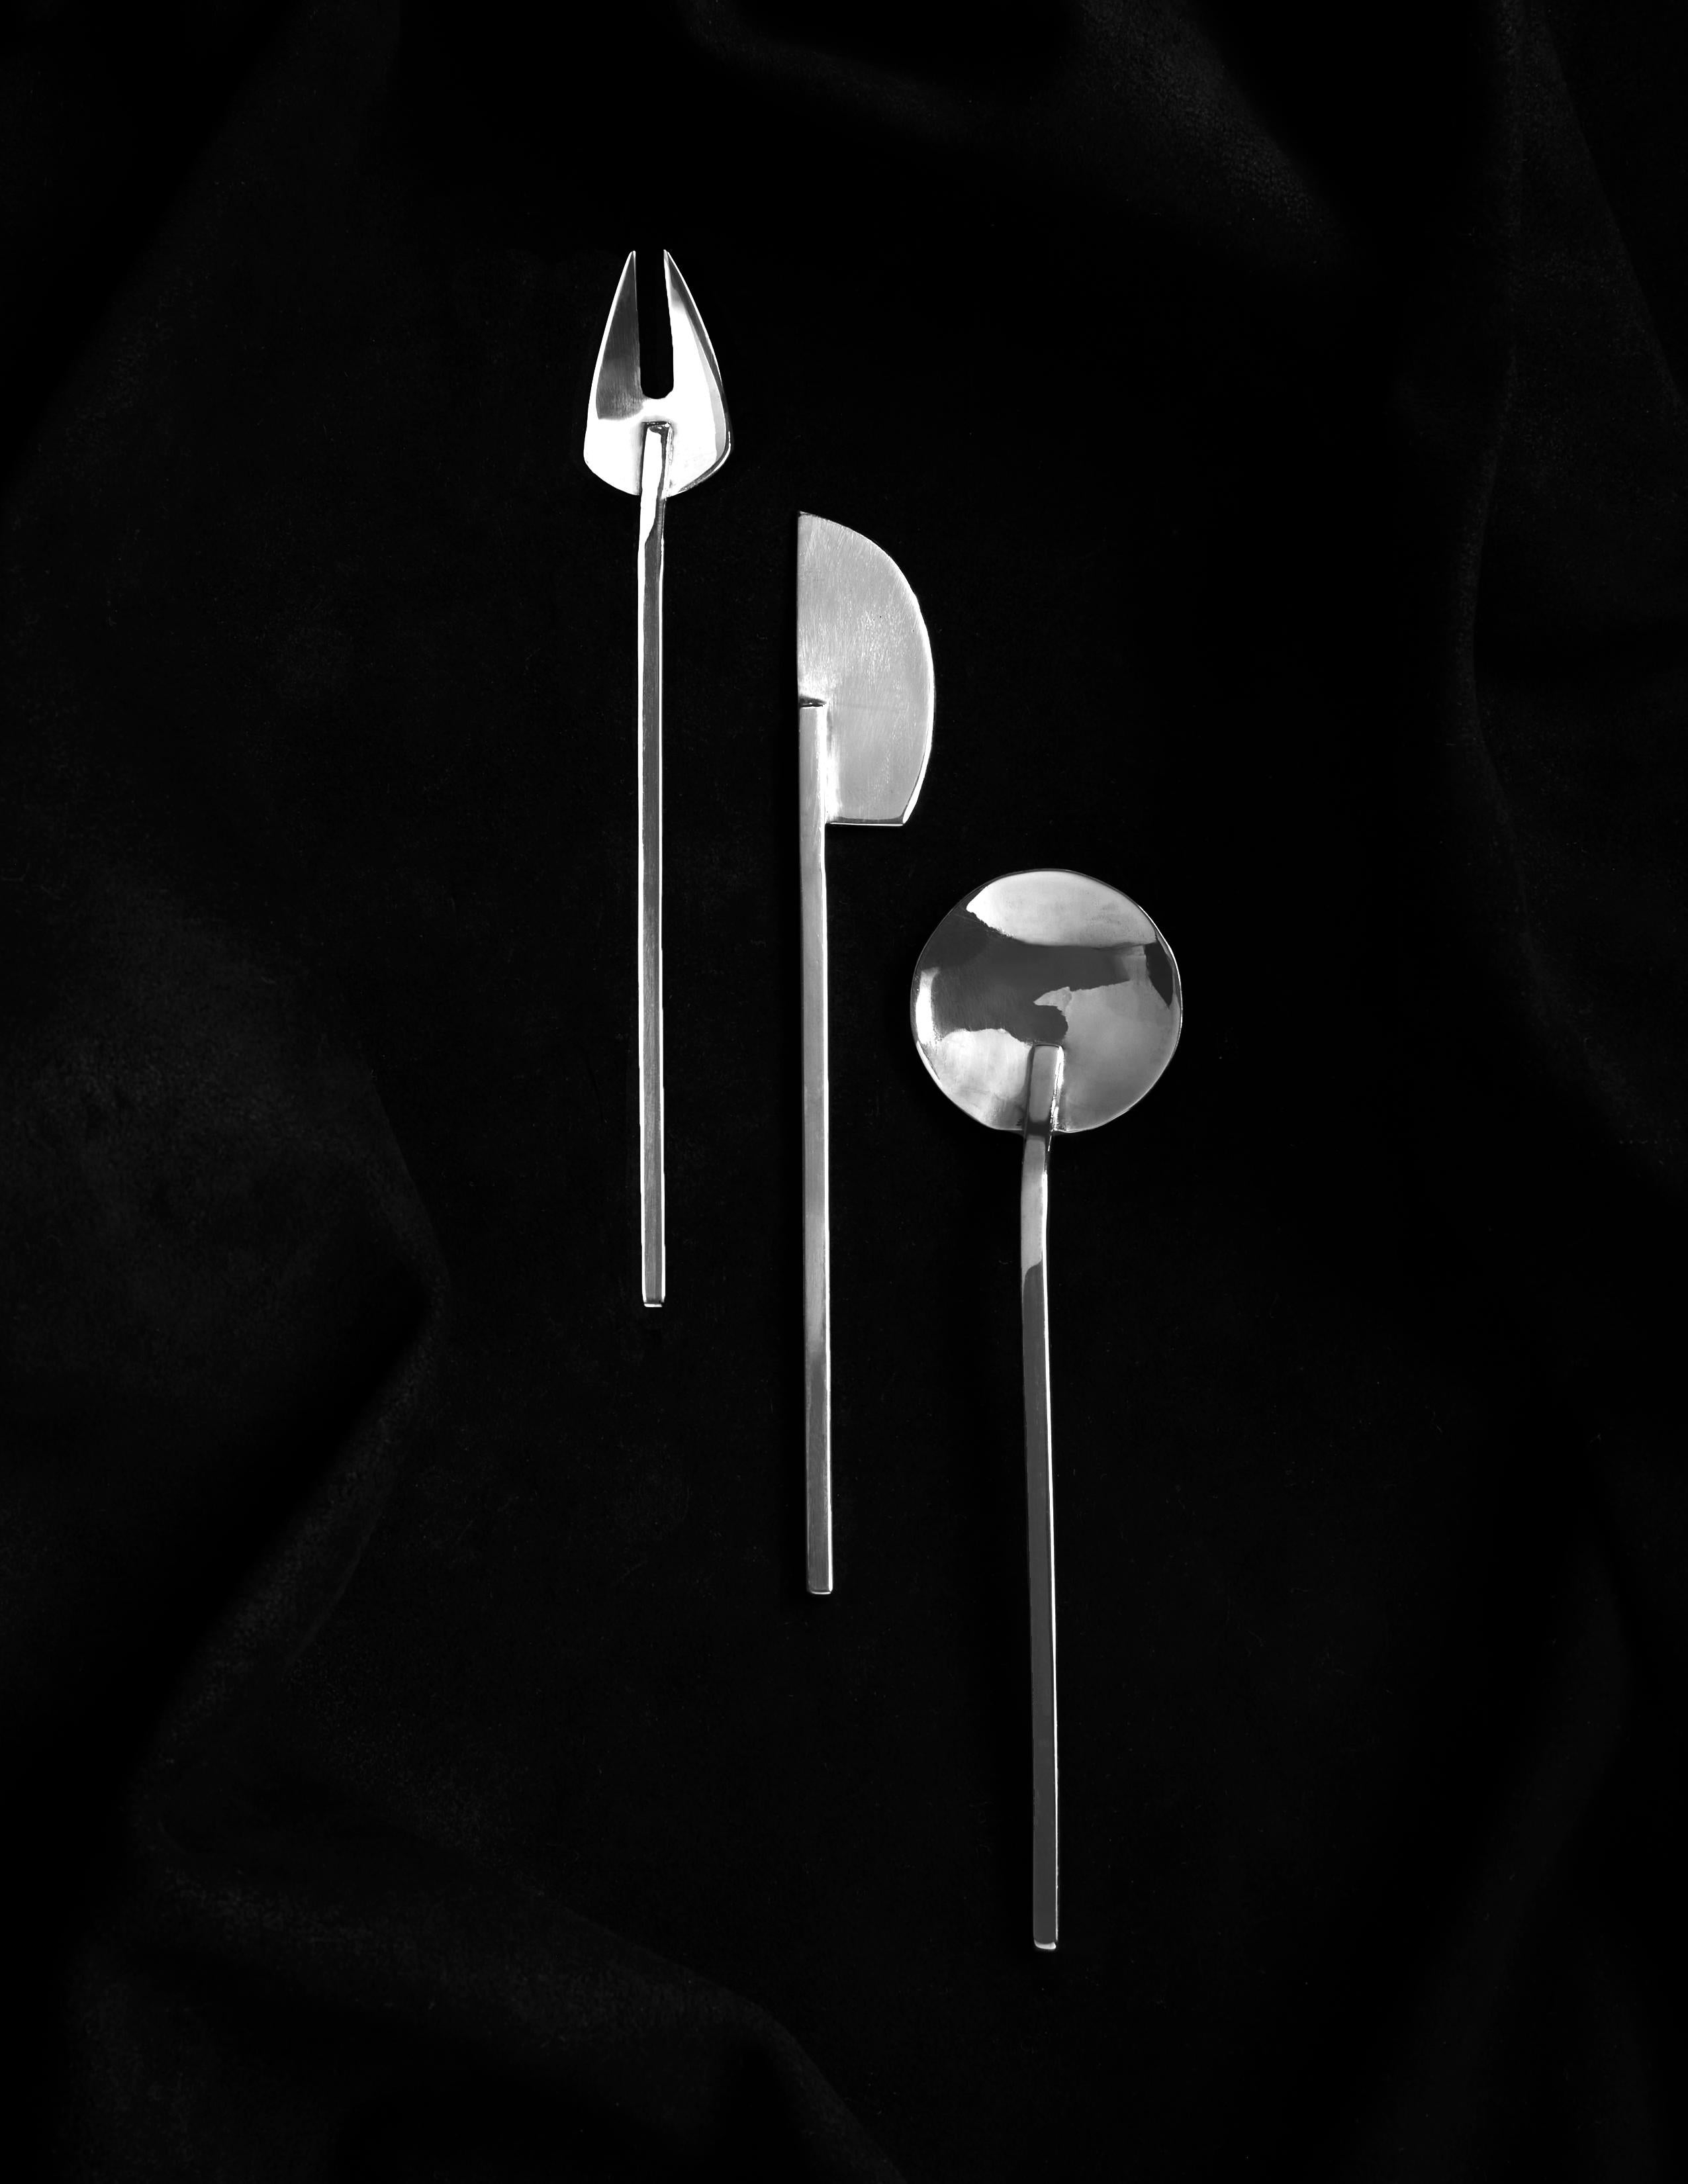 Cast in sterling silver and then finished by hand in his Brooklyn, NY studio, these pieces are the creation of silversmith and jewelry designer Heath Wagoner under HW. Studio. Designed for an after-work aperitivo or a spread of noshes before a meal